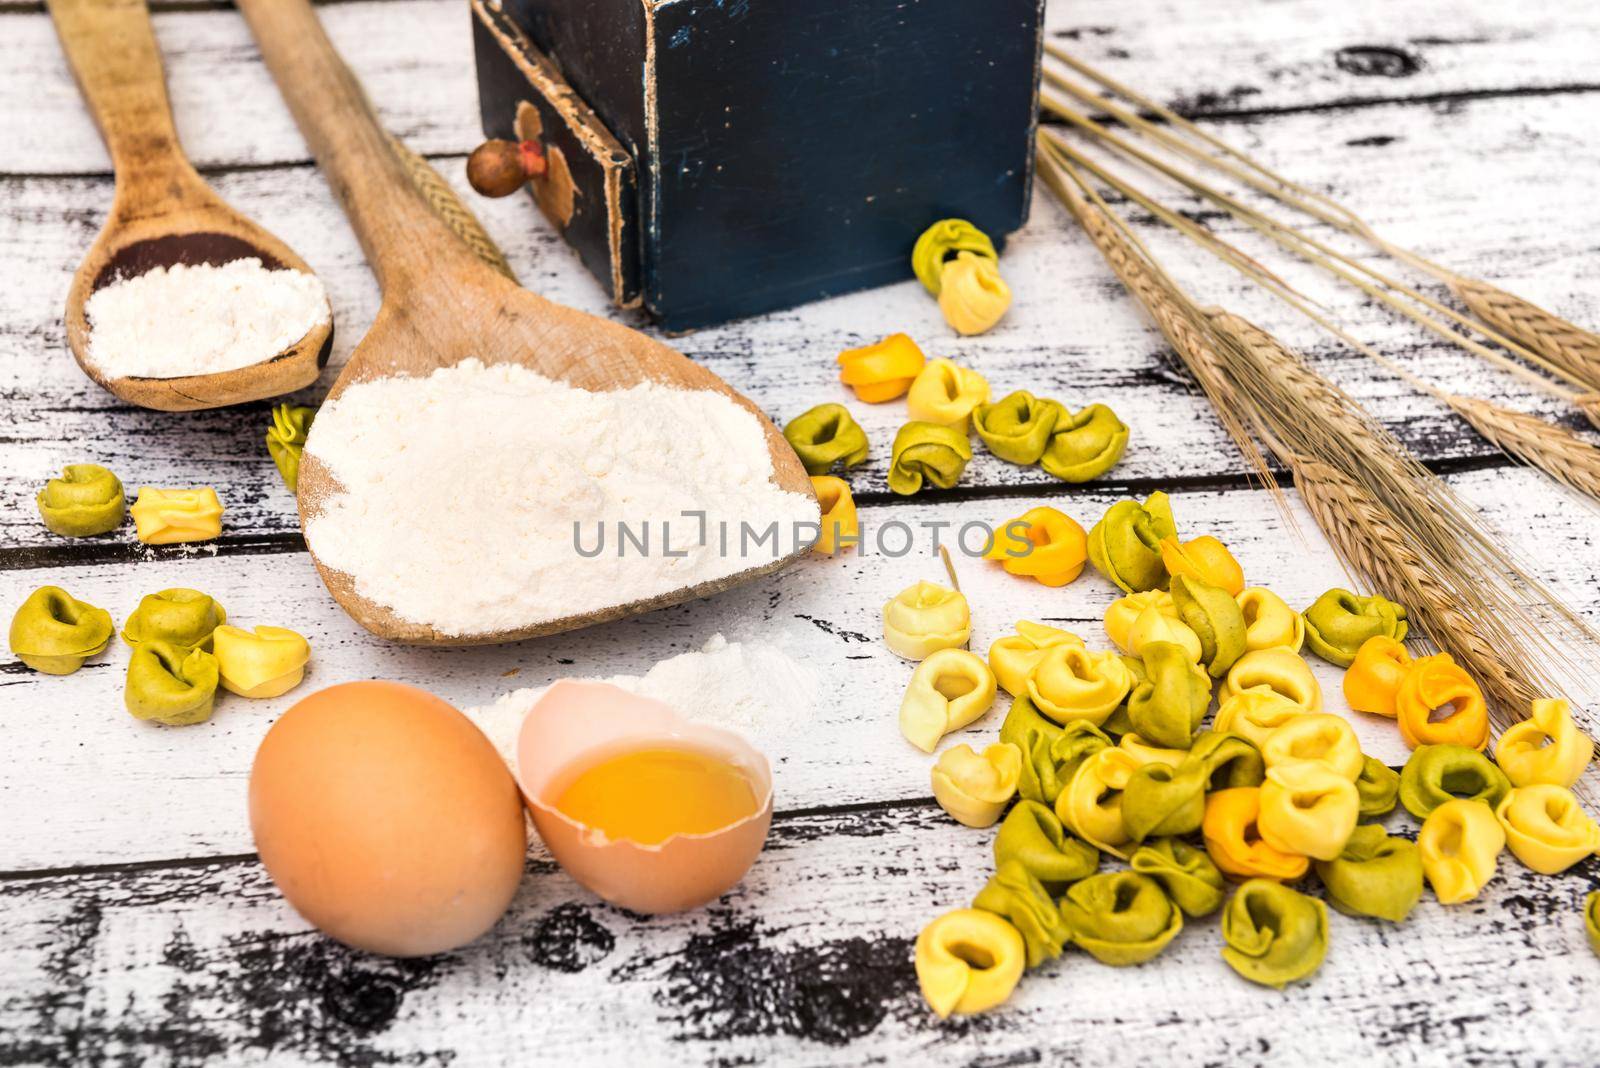 tortellini and other products on textured wooden table